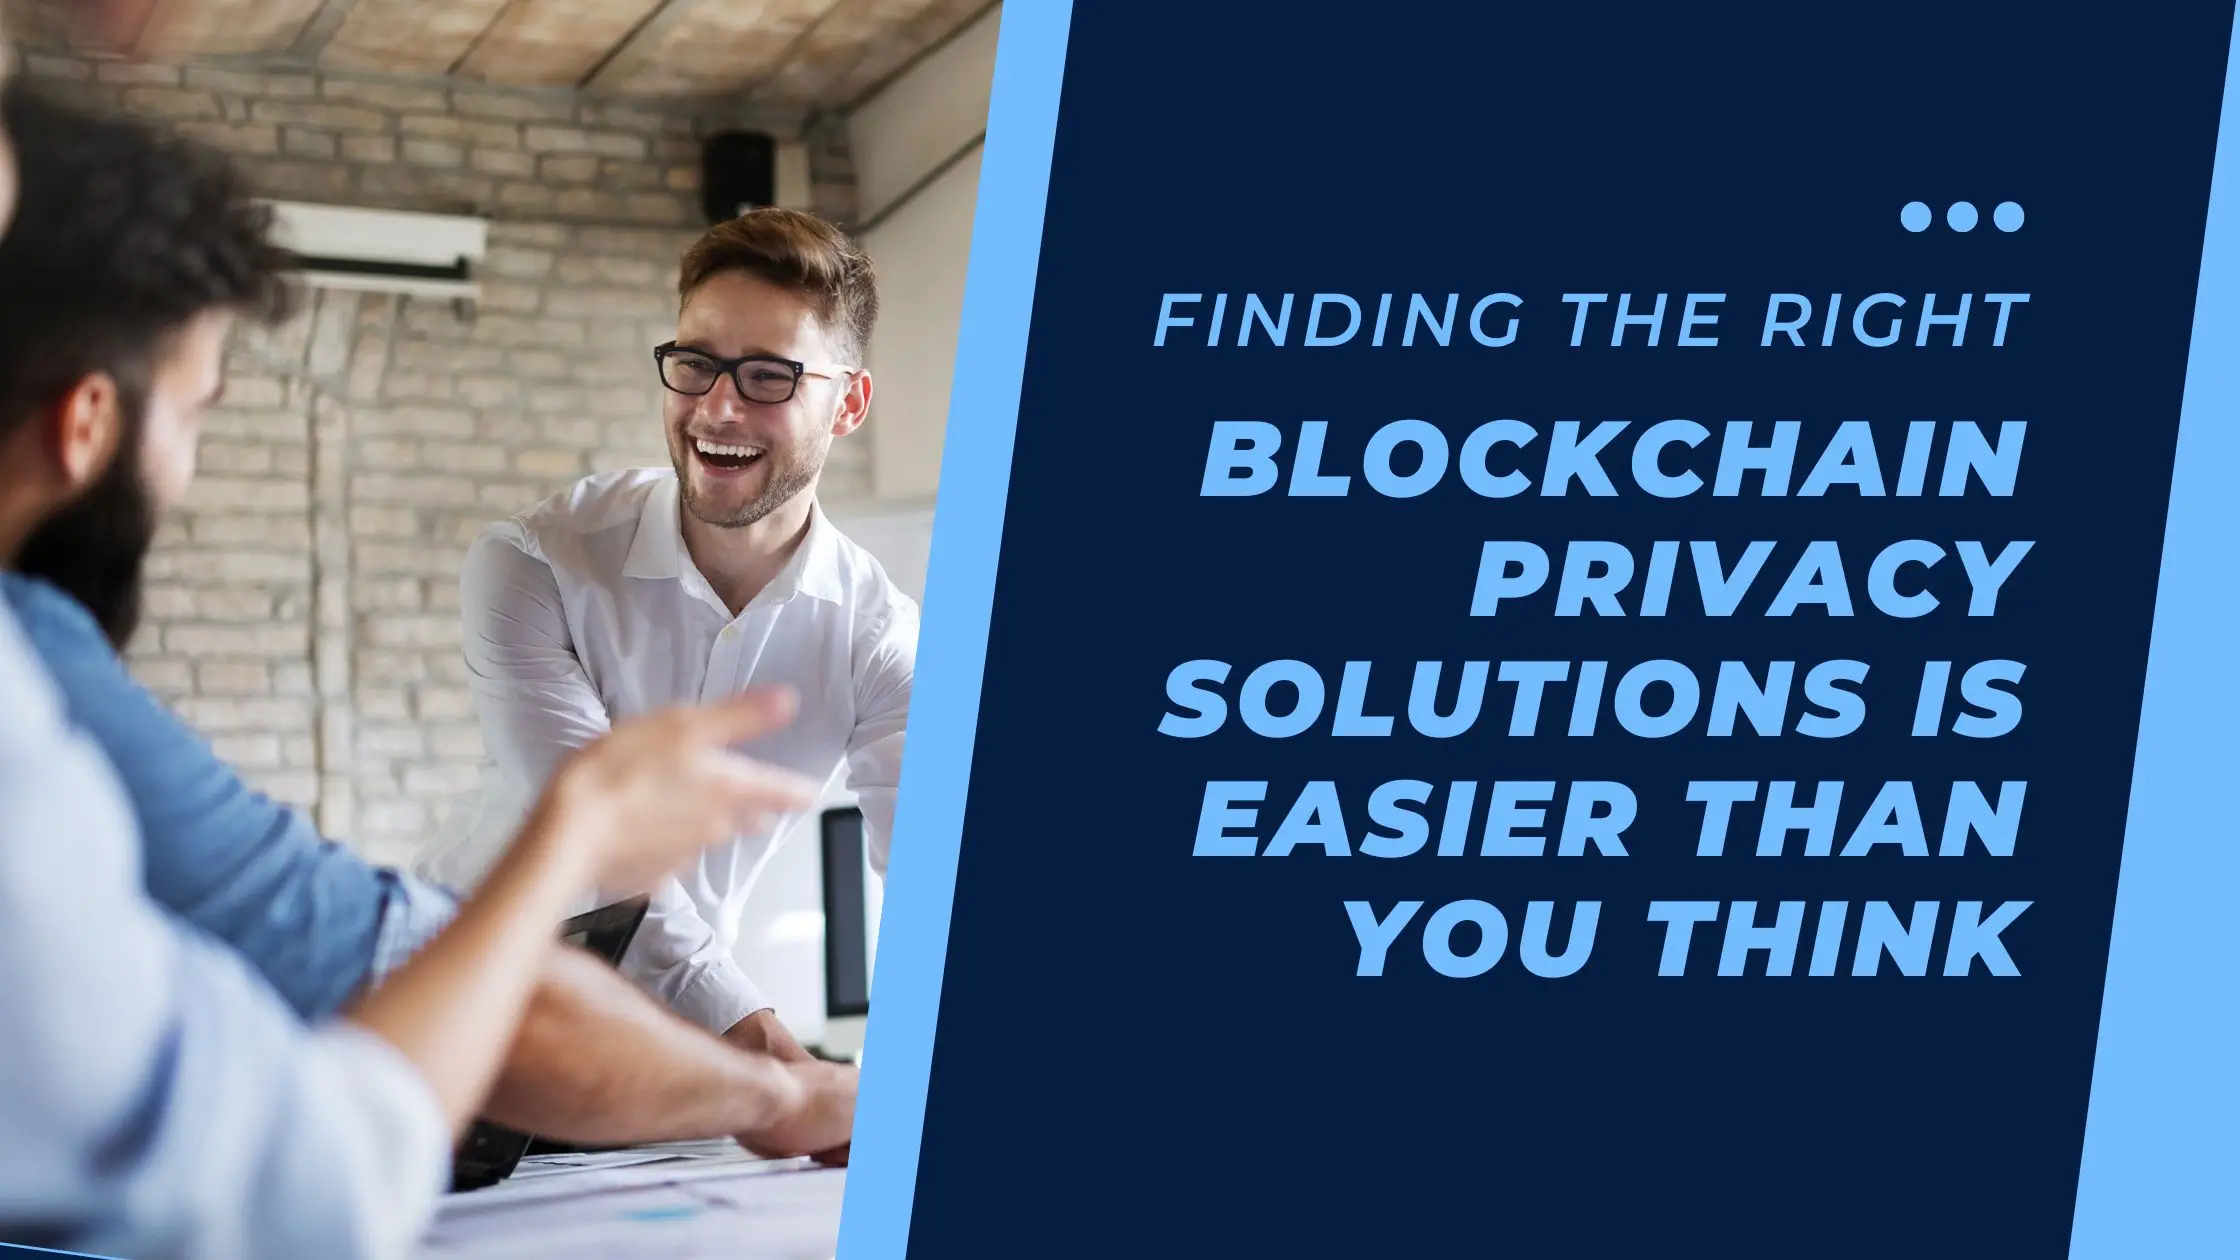 Finding the right blockchain privacy solutions is easier than you think